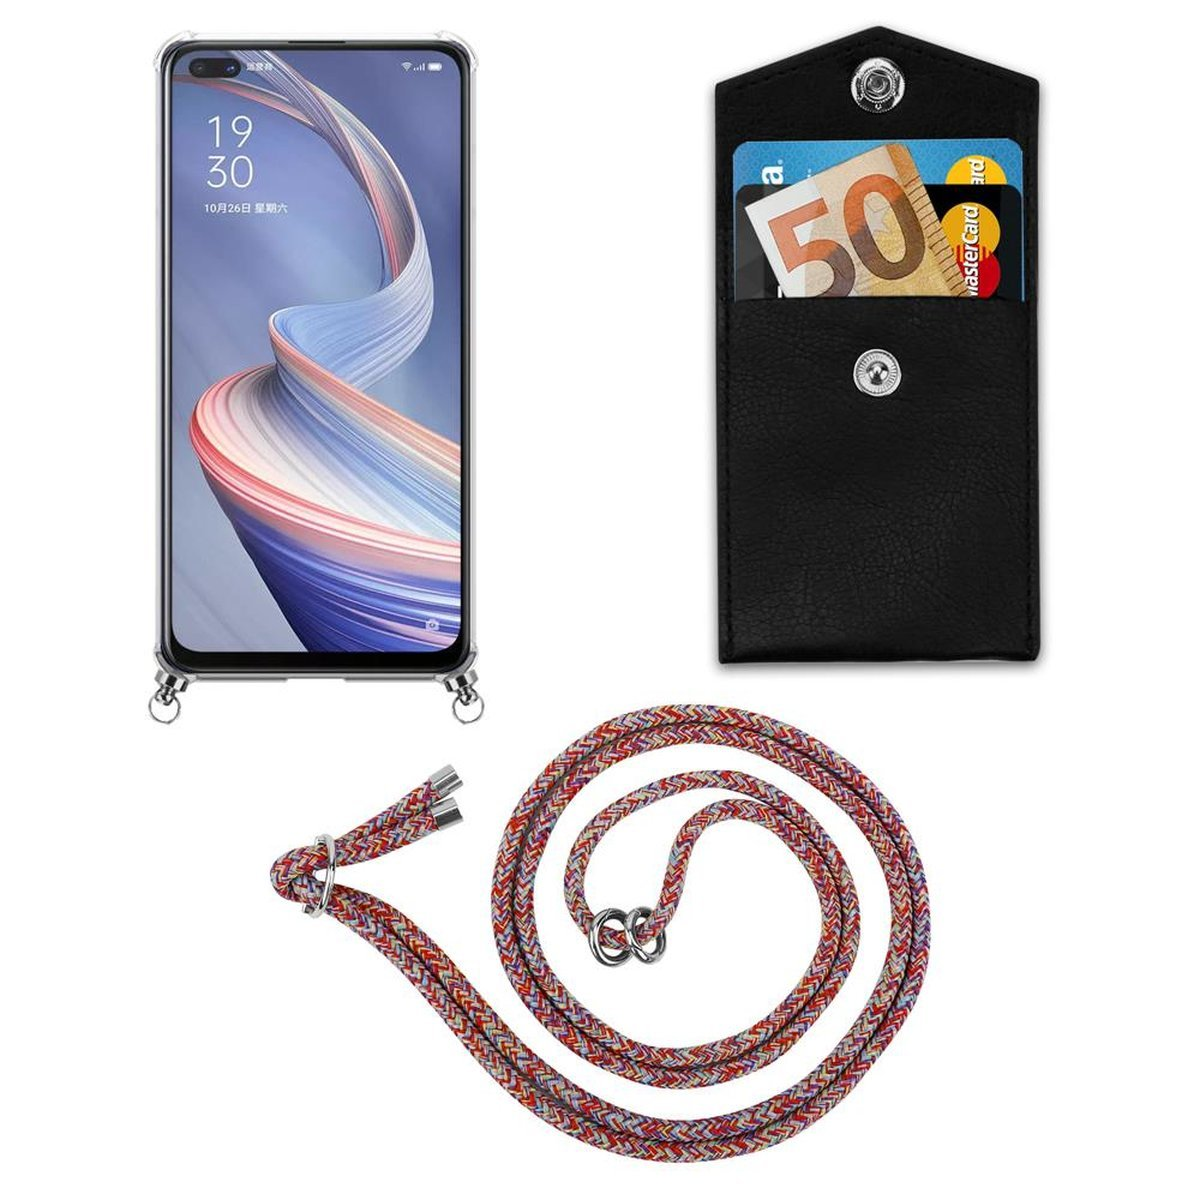 Handy abnehmbarer Ringen, Backcover, PARROT mit COLORFUL und Kordel A92s, Oppo, Kette Silber Hülle, CADORABO Band